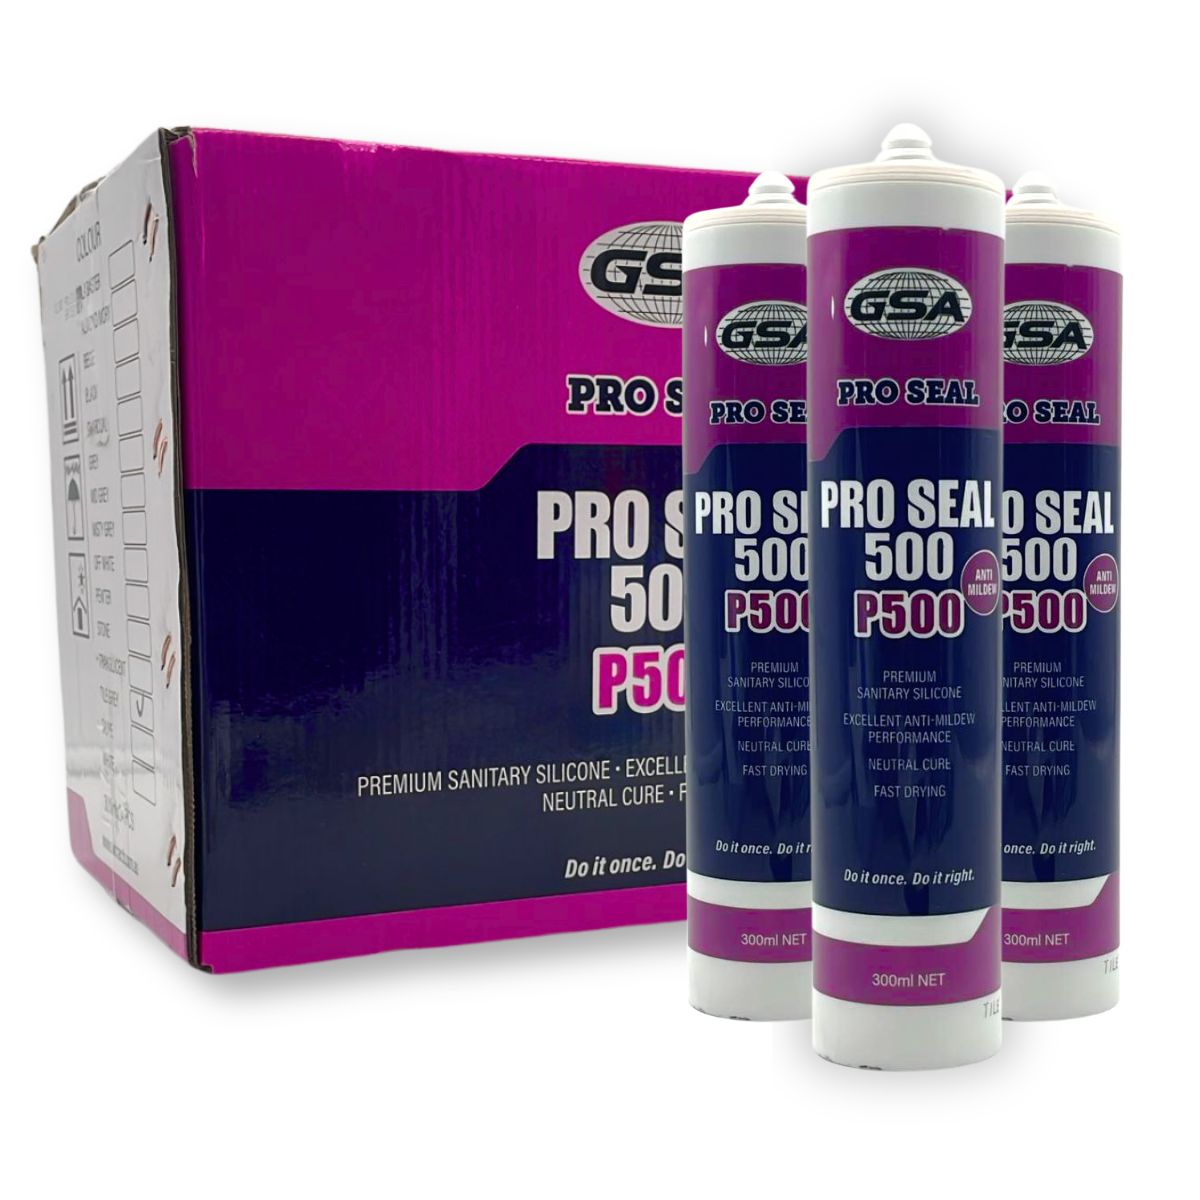 GSA PROSEAL 500 | WHITE/LIGHT GREY (24 CARTRIDGES) - South East Clearance Centre